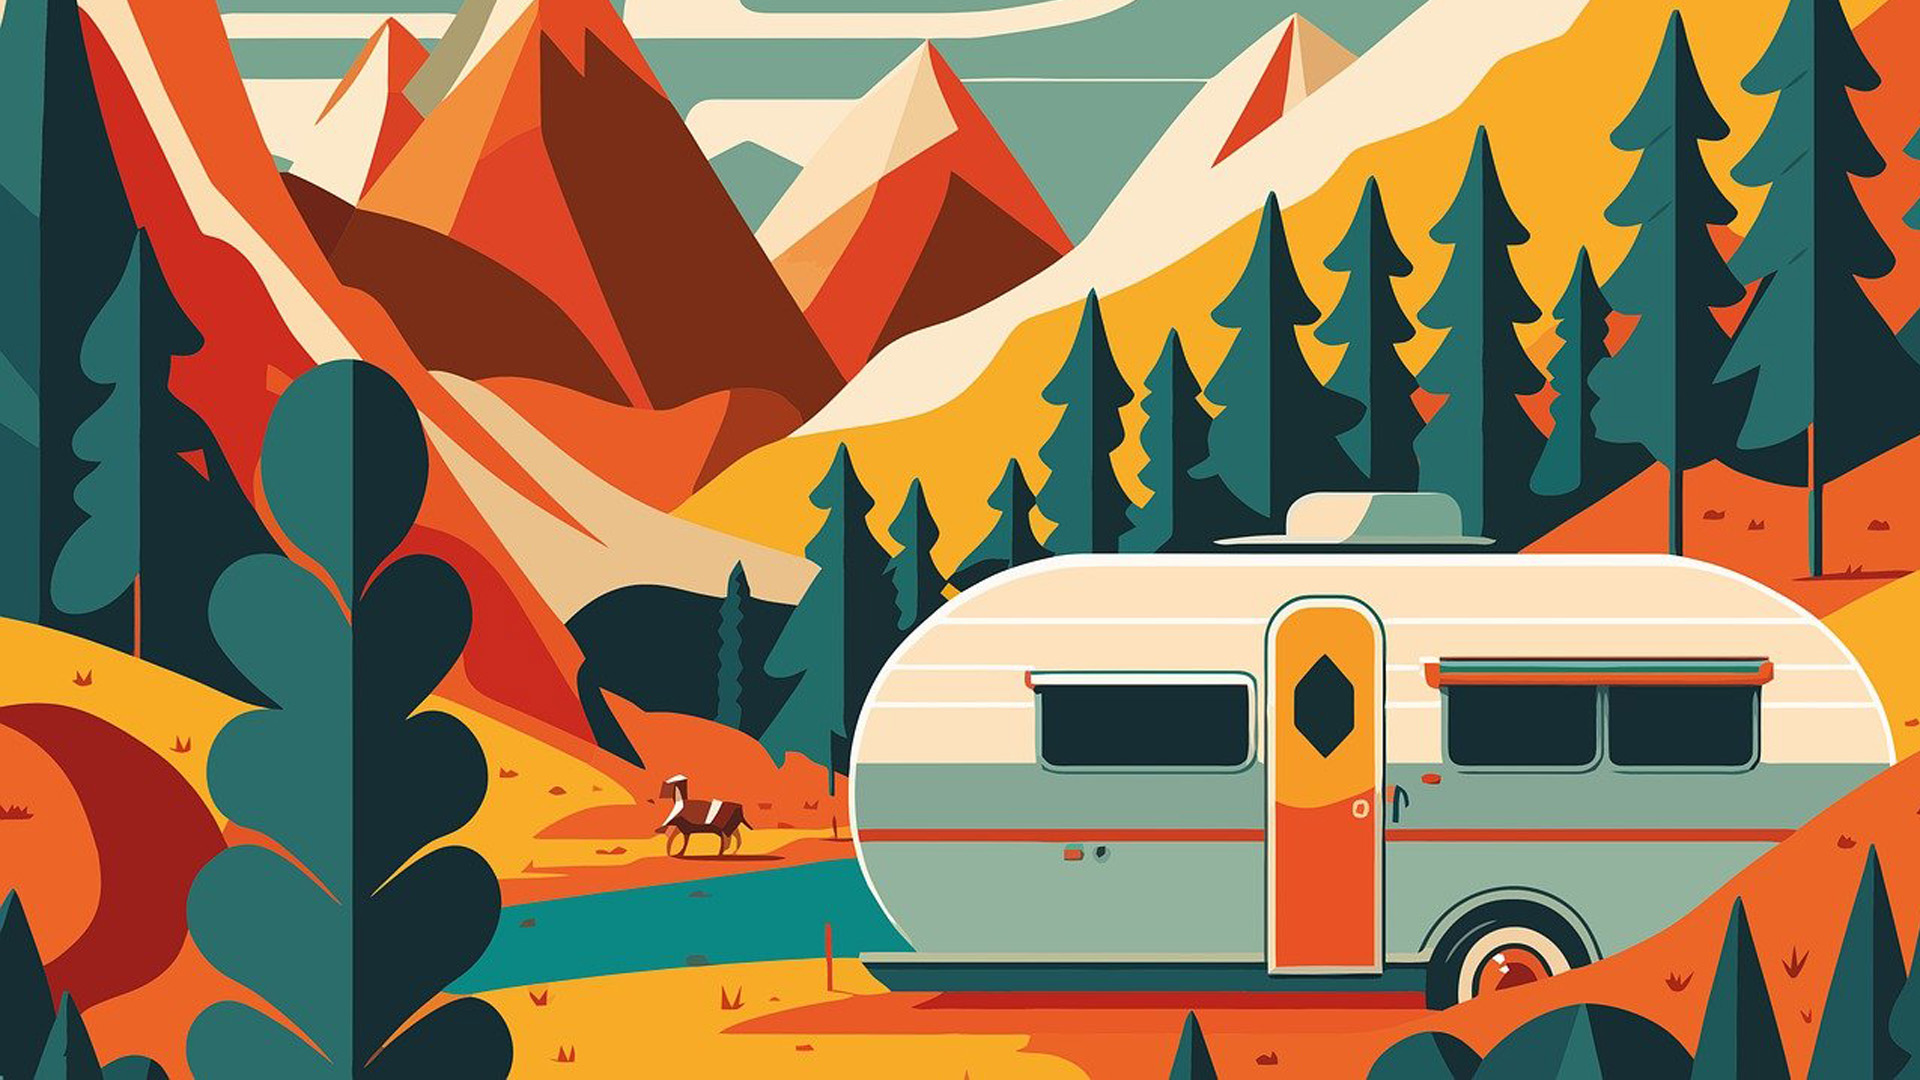 A illustrated image of a camper parked in a field of mountains and trees. Colors that make up the image are teal, yellow, red, cream, a lighter teal, orange and a deeper rust orange.